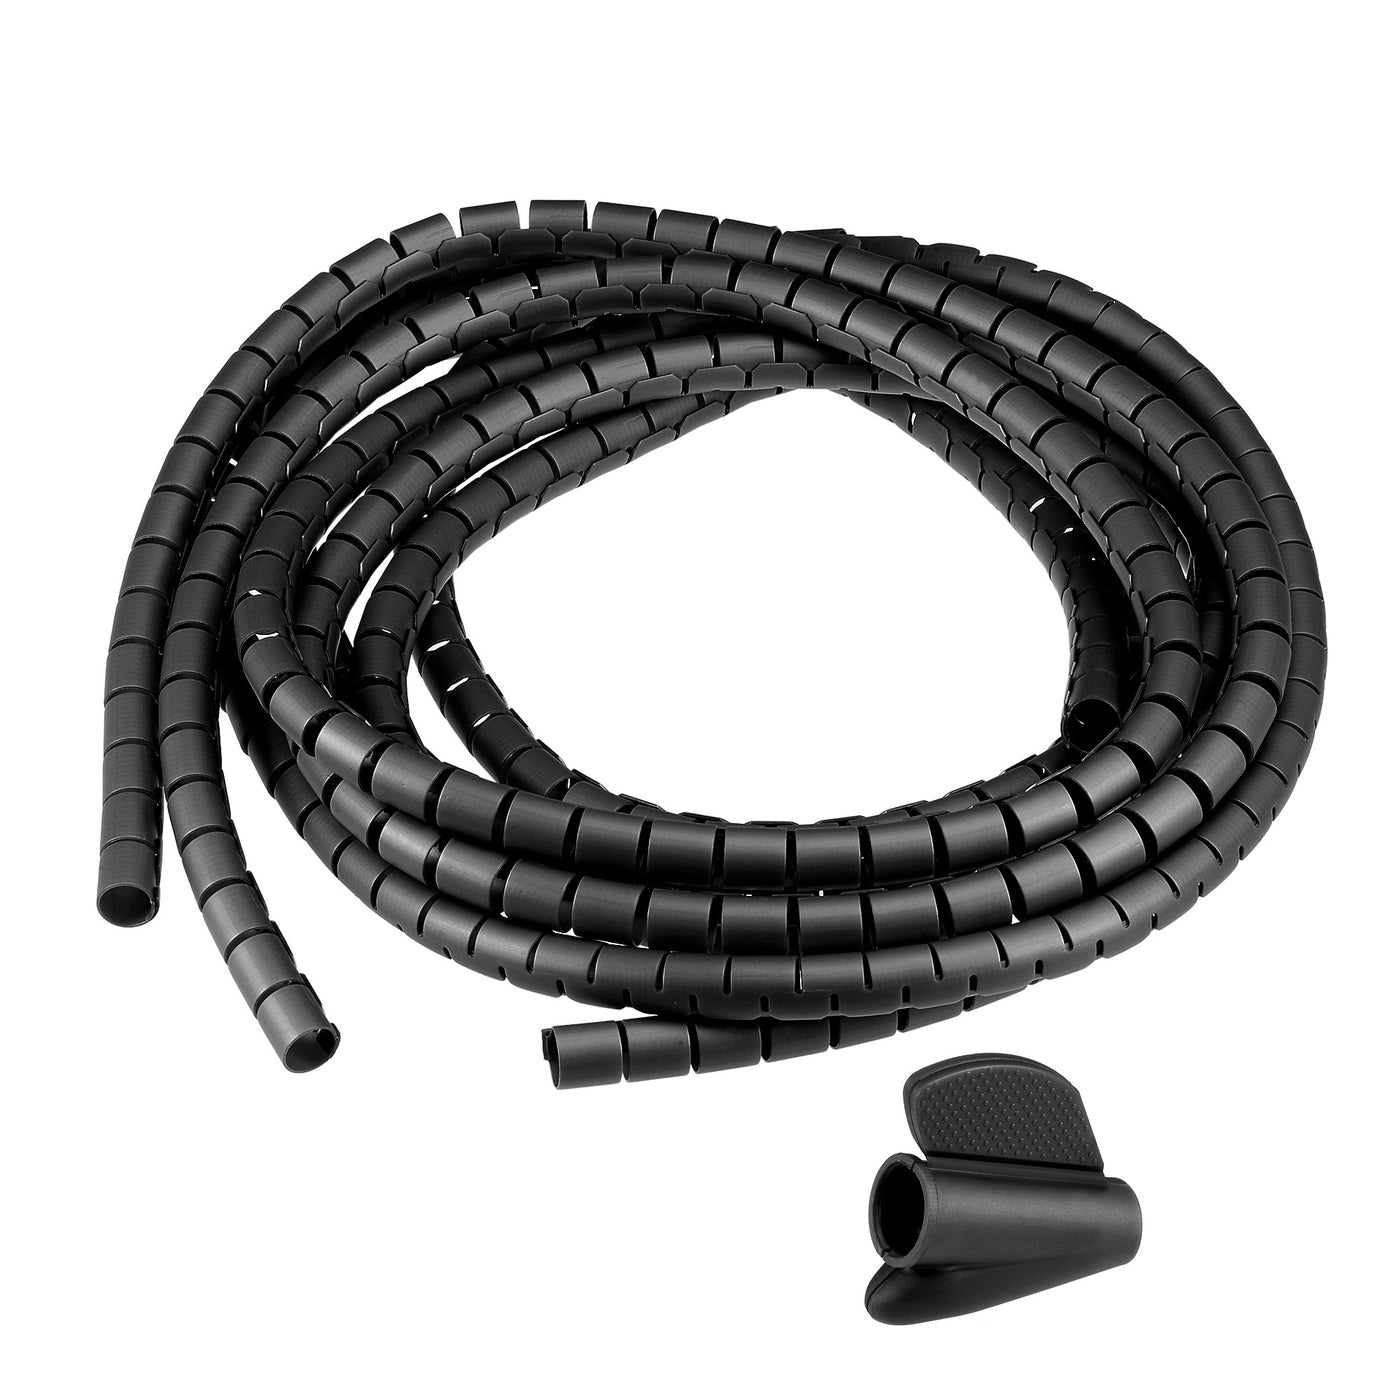 uxcell Uxcell 12mm Split Cable Wire Wrap for Cord Management Black 2 Meters with Zipper 2 pcs